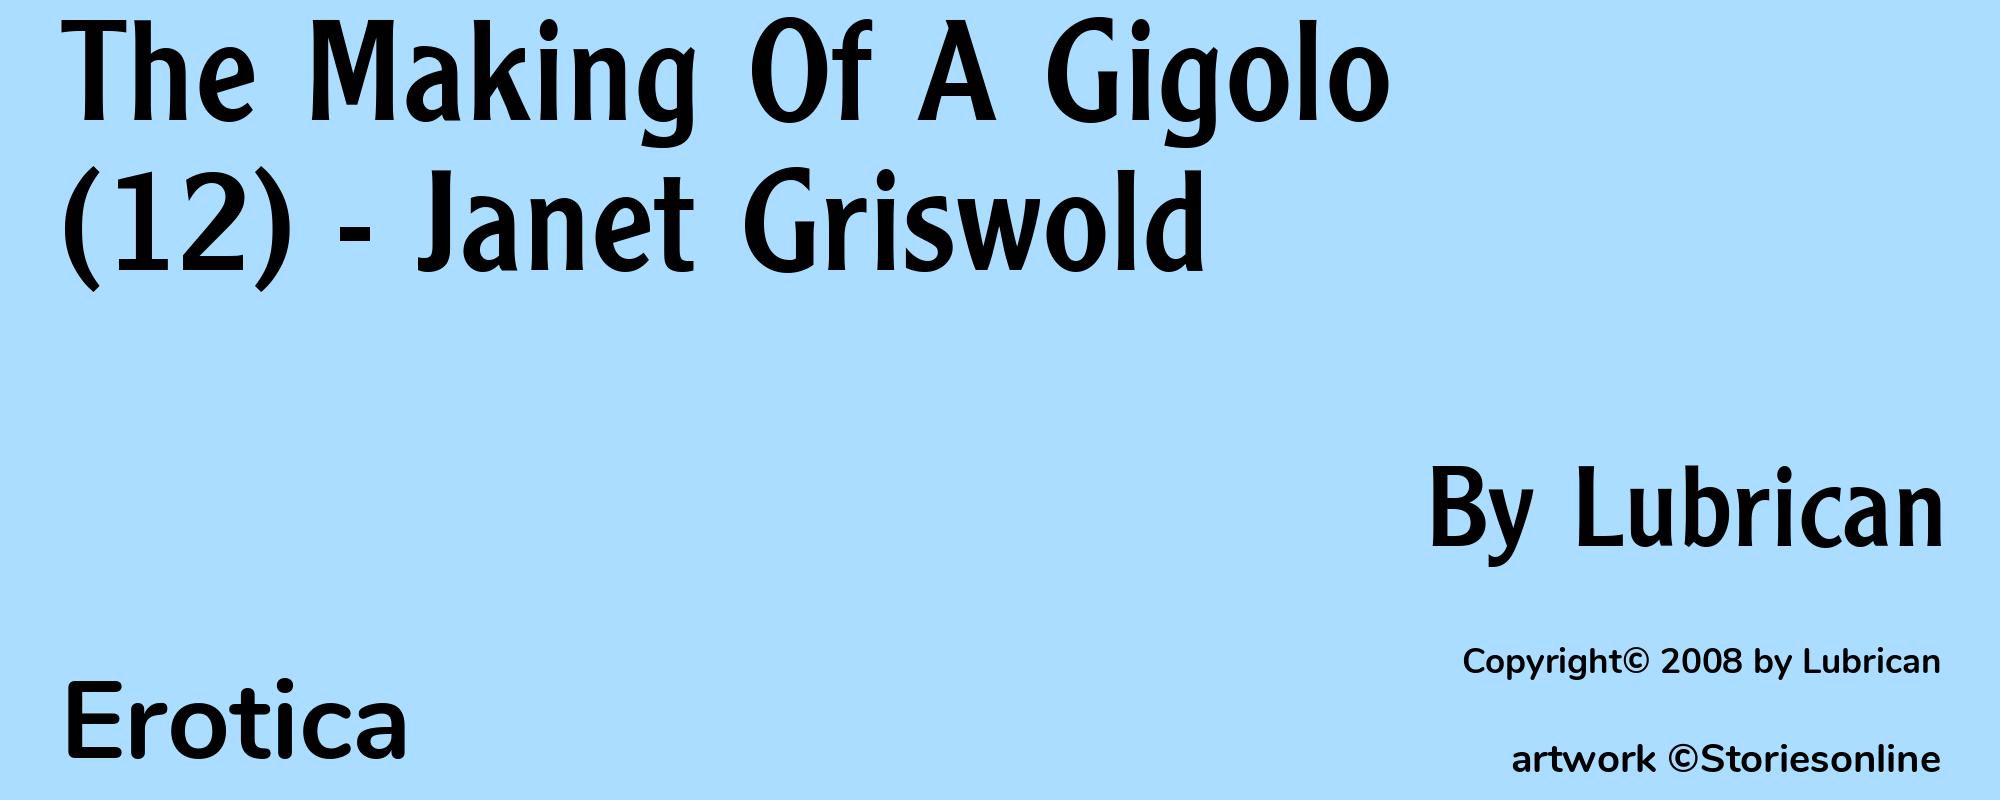 The Making Of A Gigolo (12) - Janet Griswold - Cover